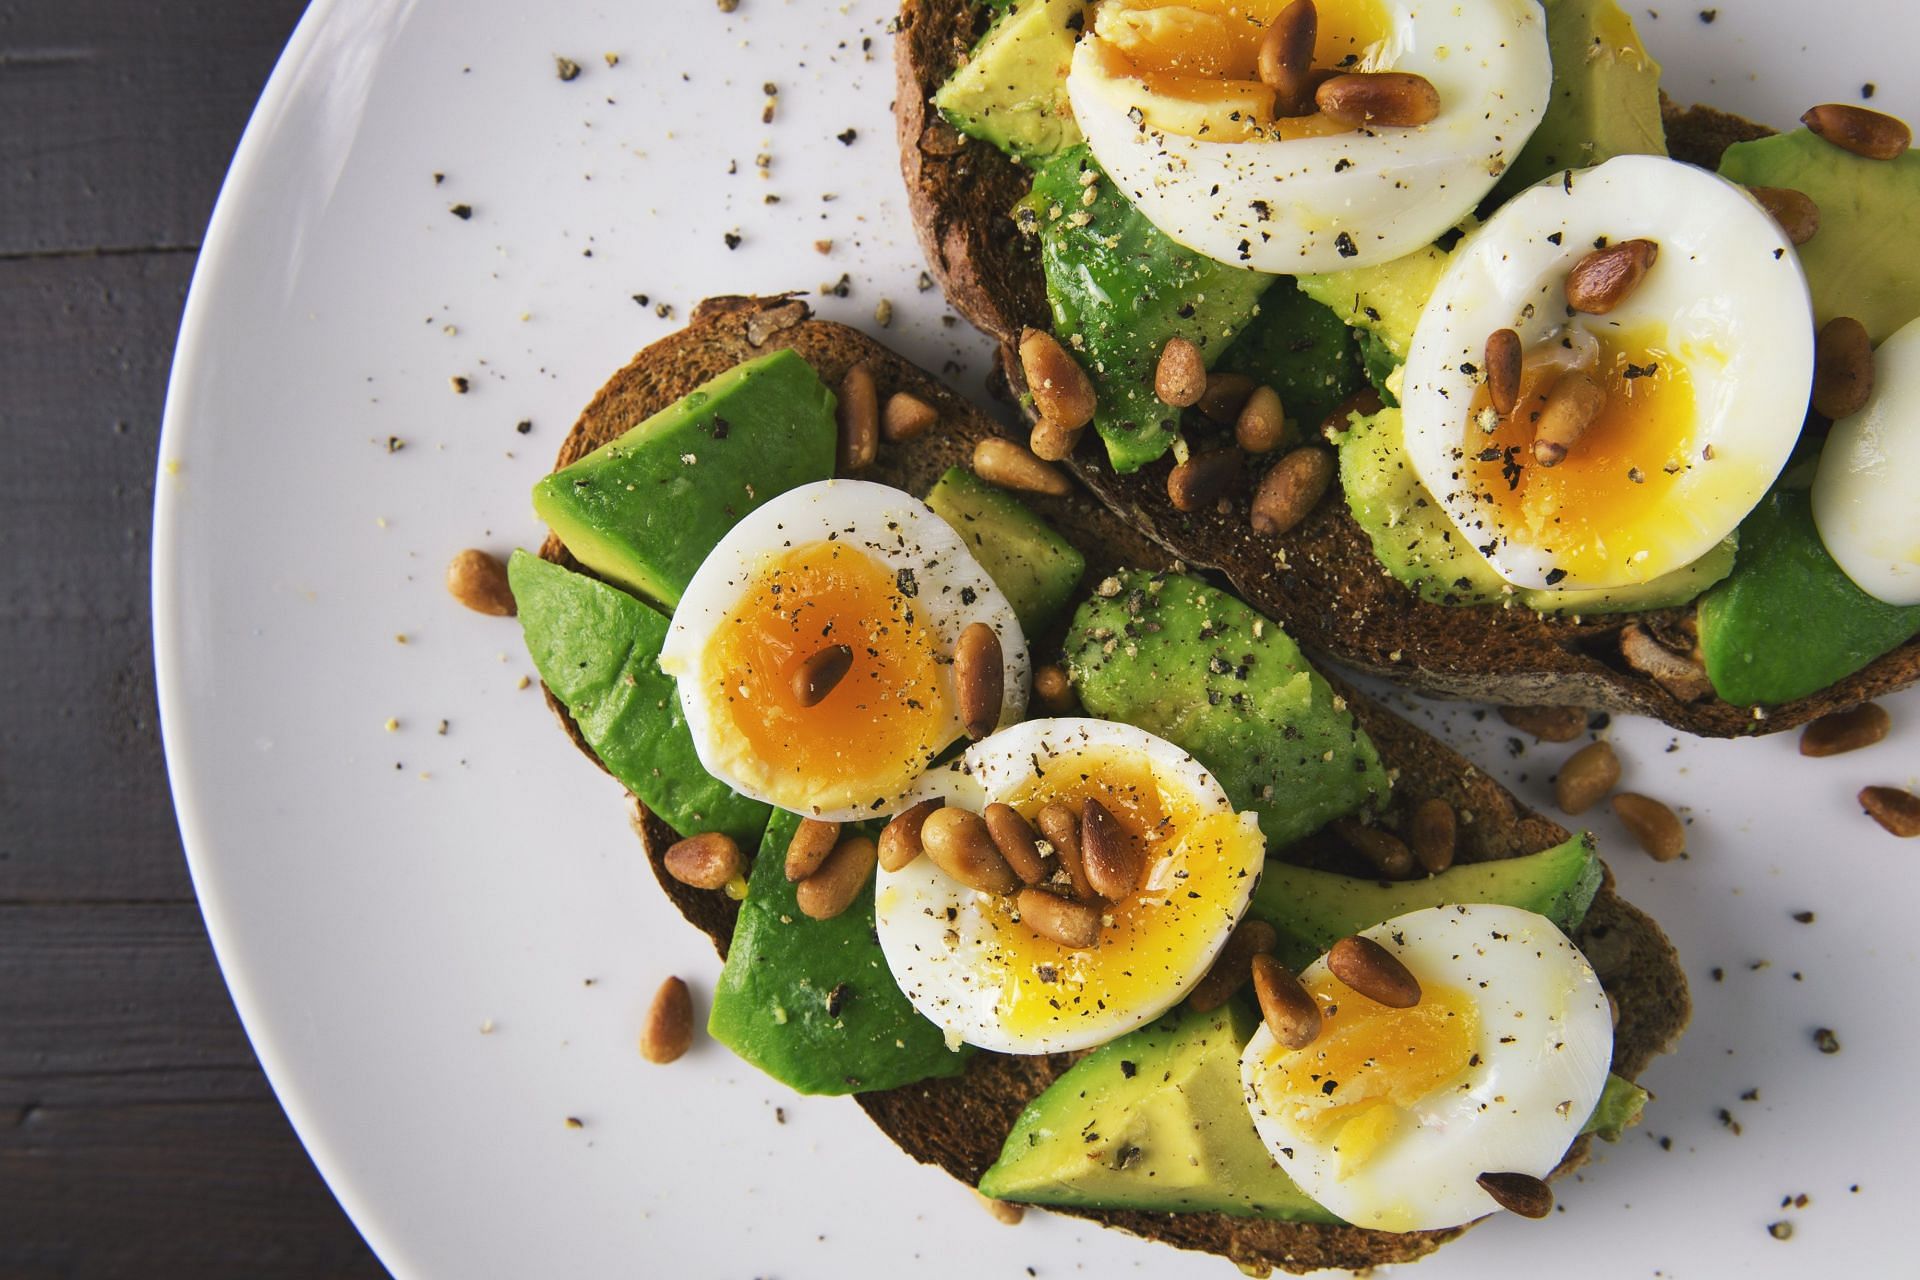 Benefits of eggs in dysphagia diet (image sourced via Pexels / Photo by Foodie)